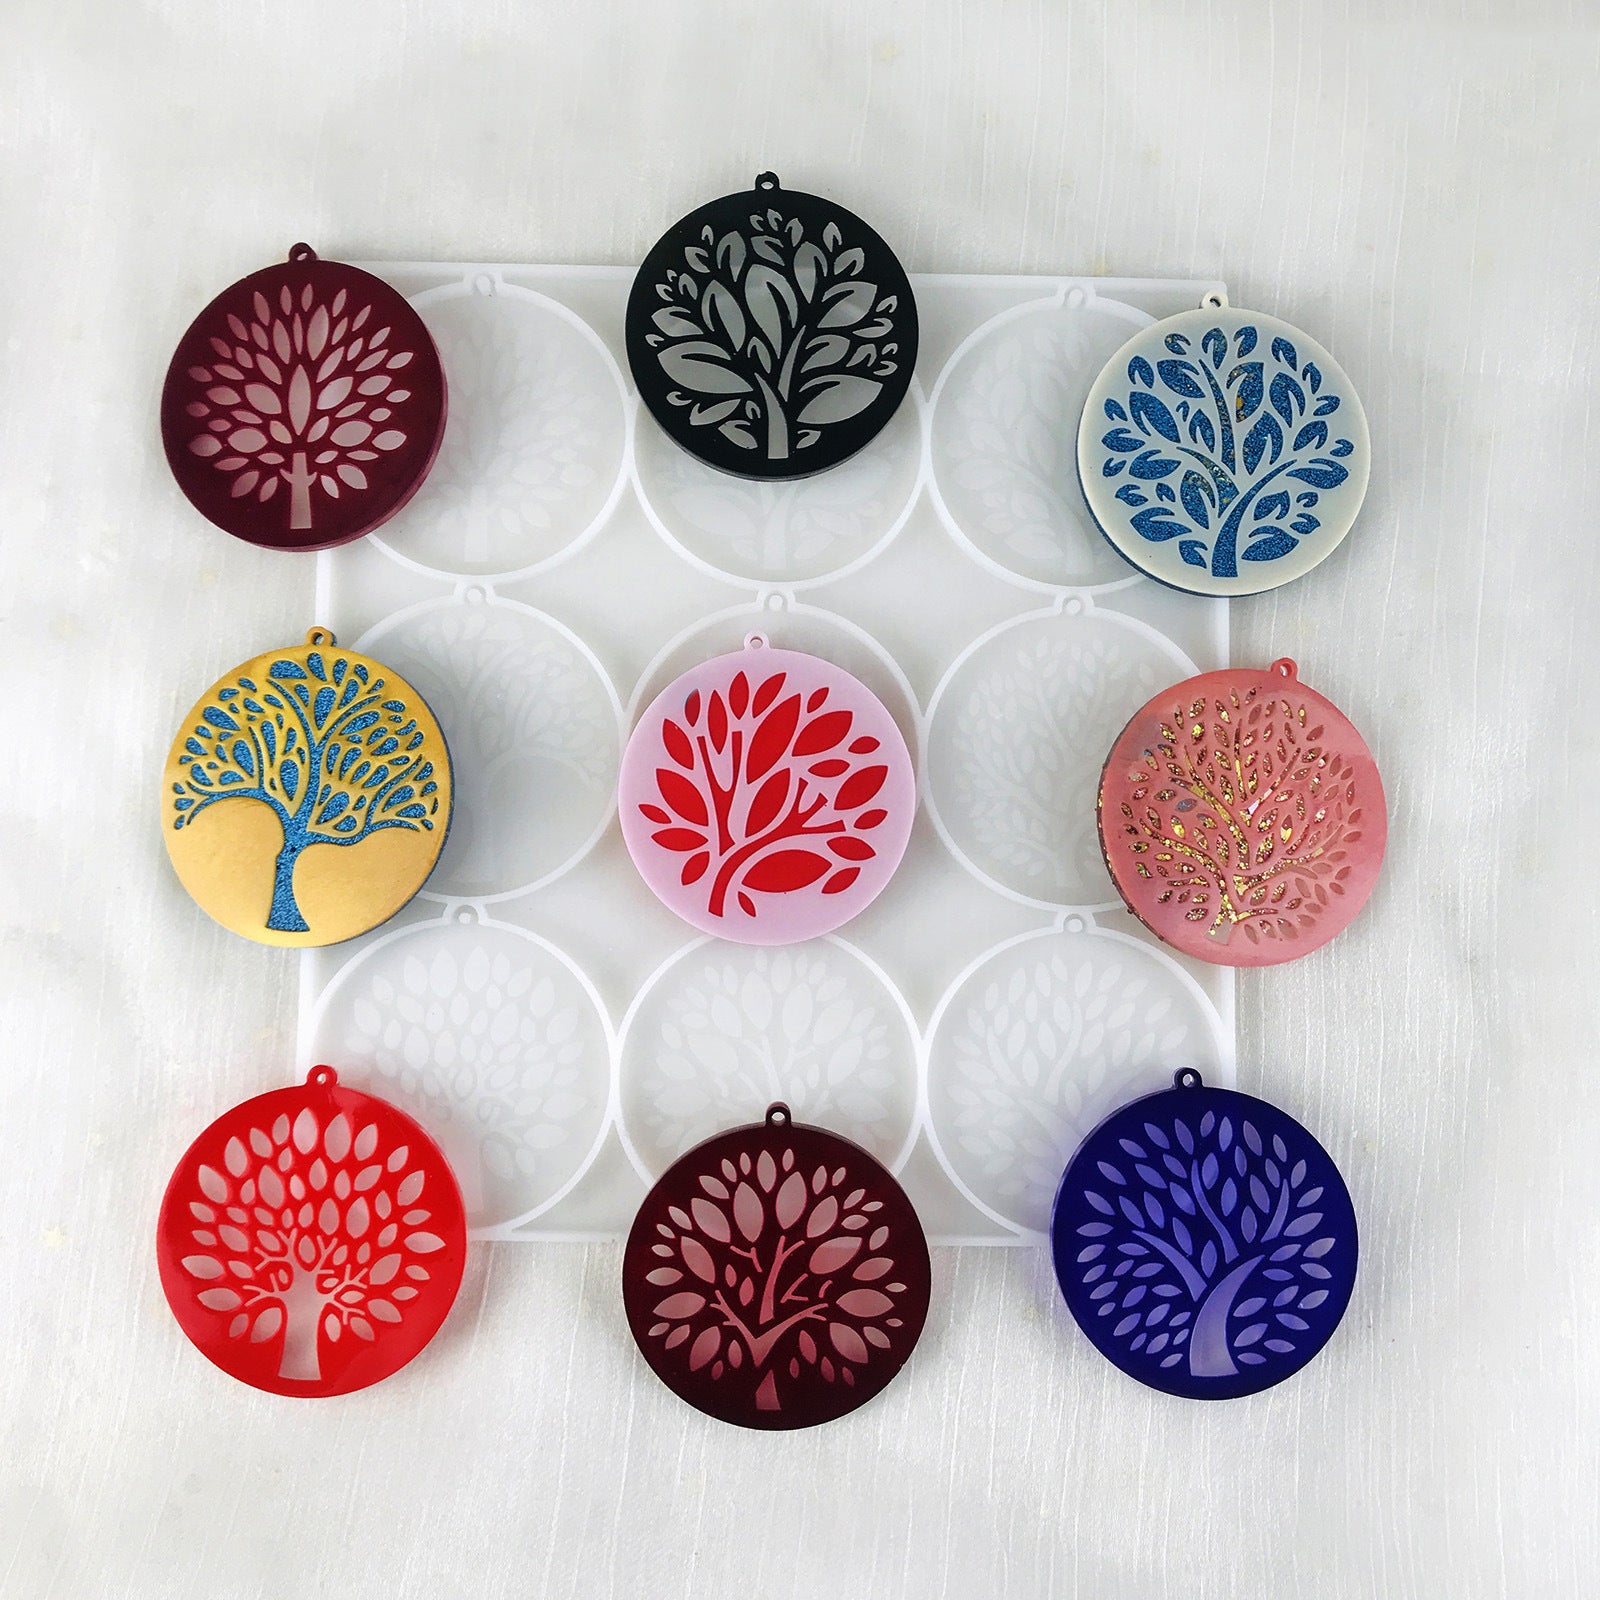 Tree of Life Keychain Accessories Decorative Resin Mold